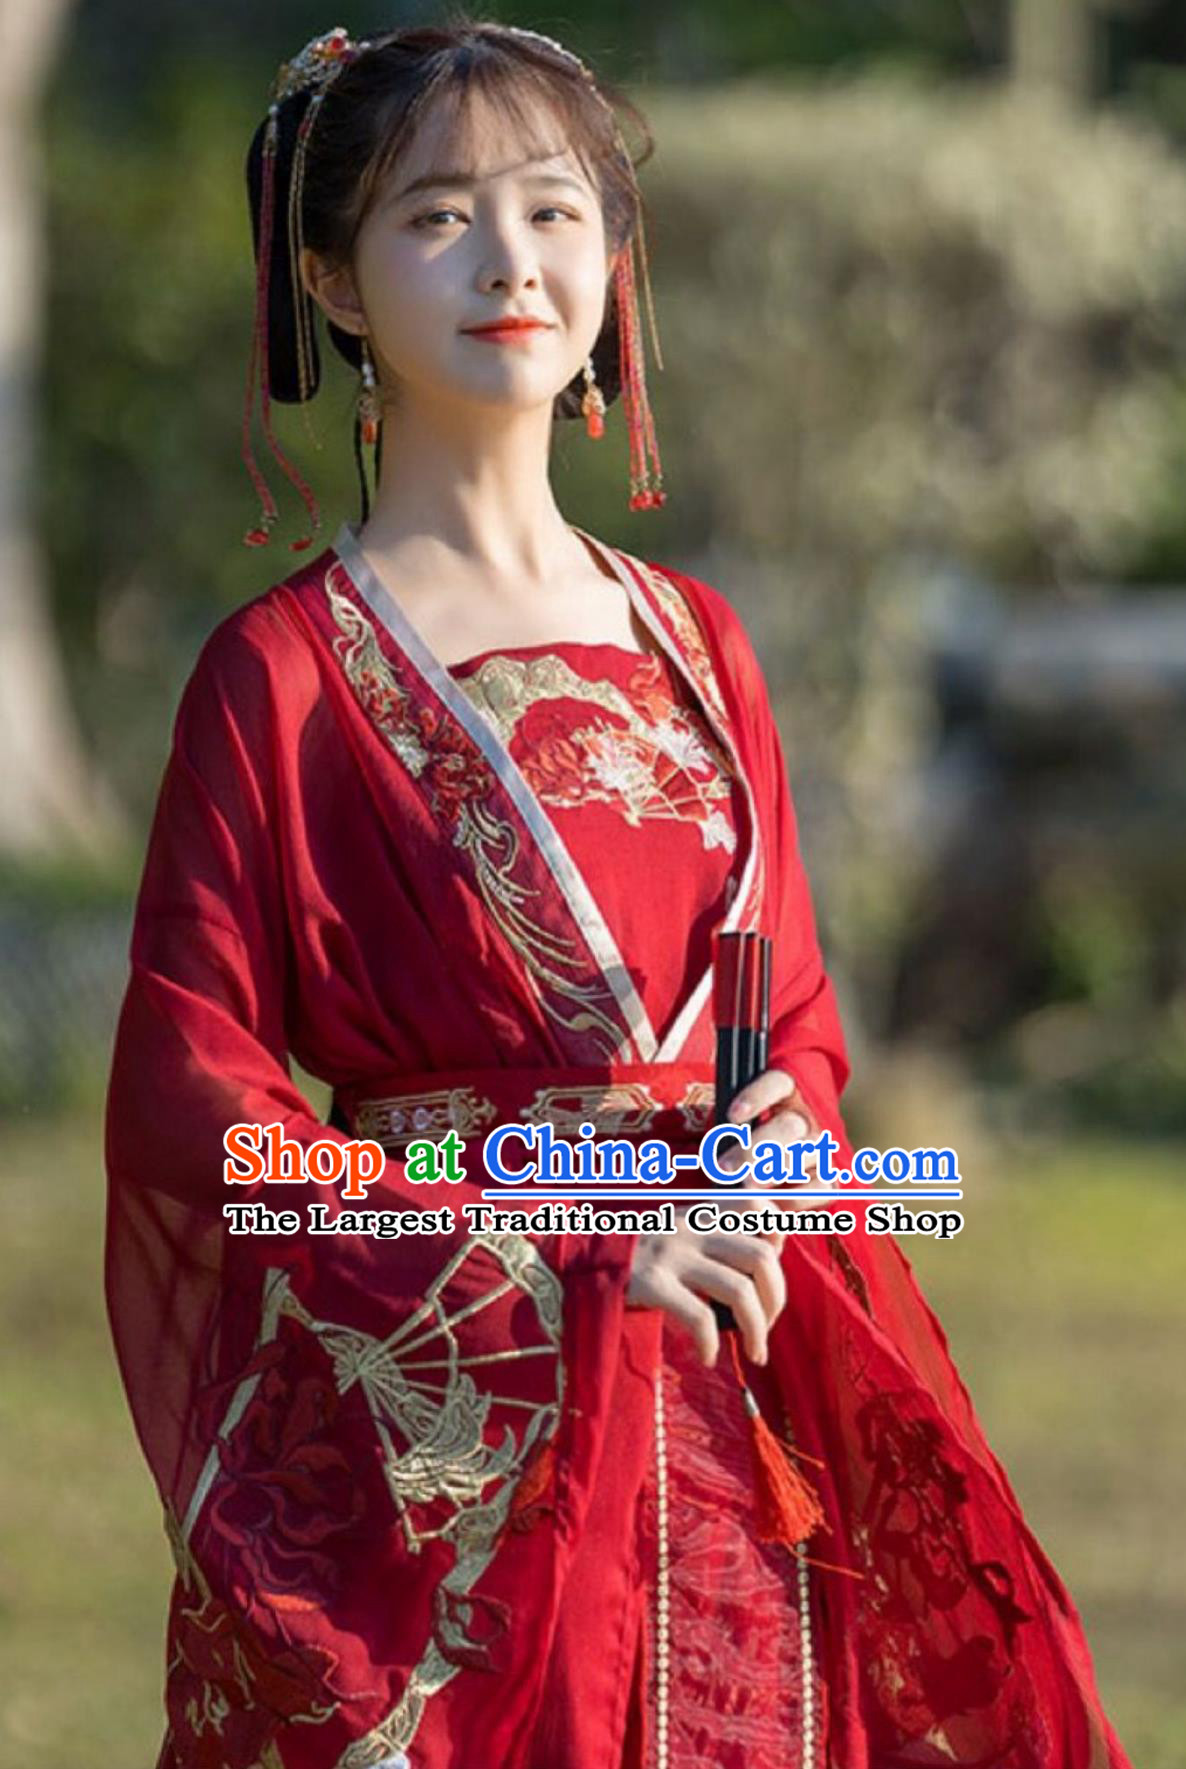 Chinese Traditional Bride Wedding Dress Hanfu Online Buy Ancient Chinese Tang Dynasty Princess Costumes